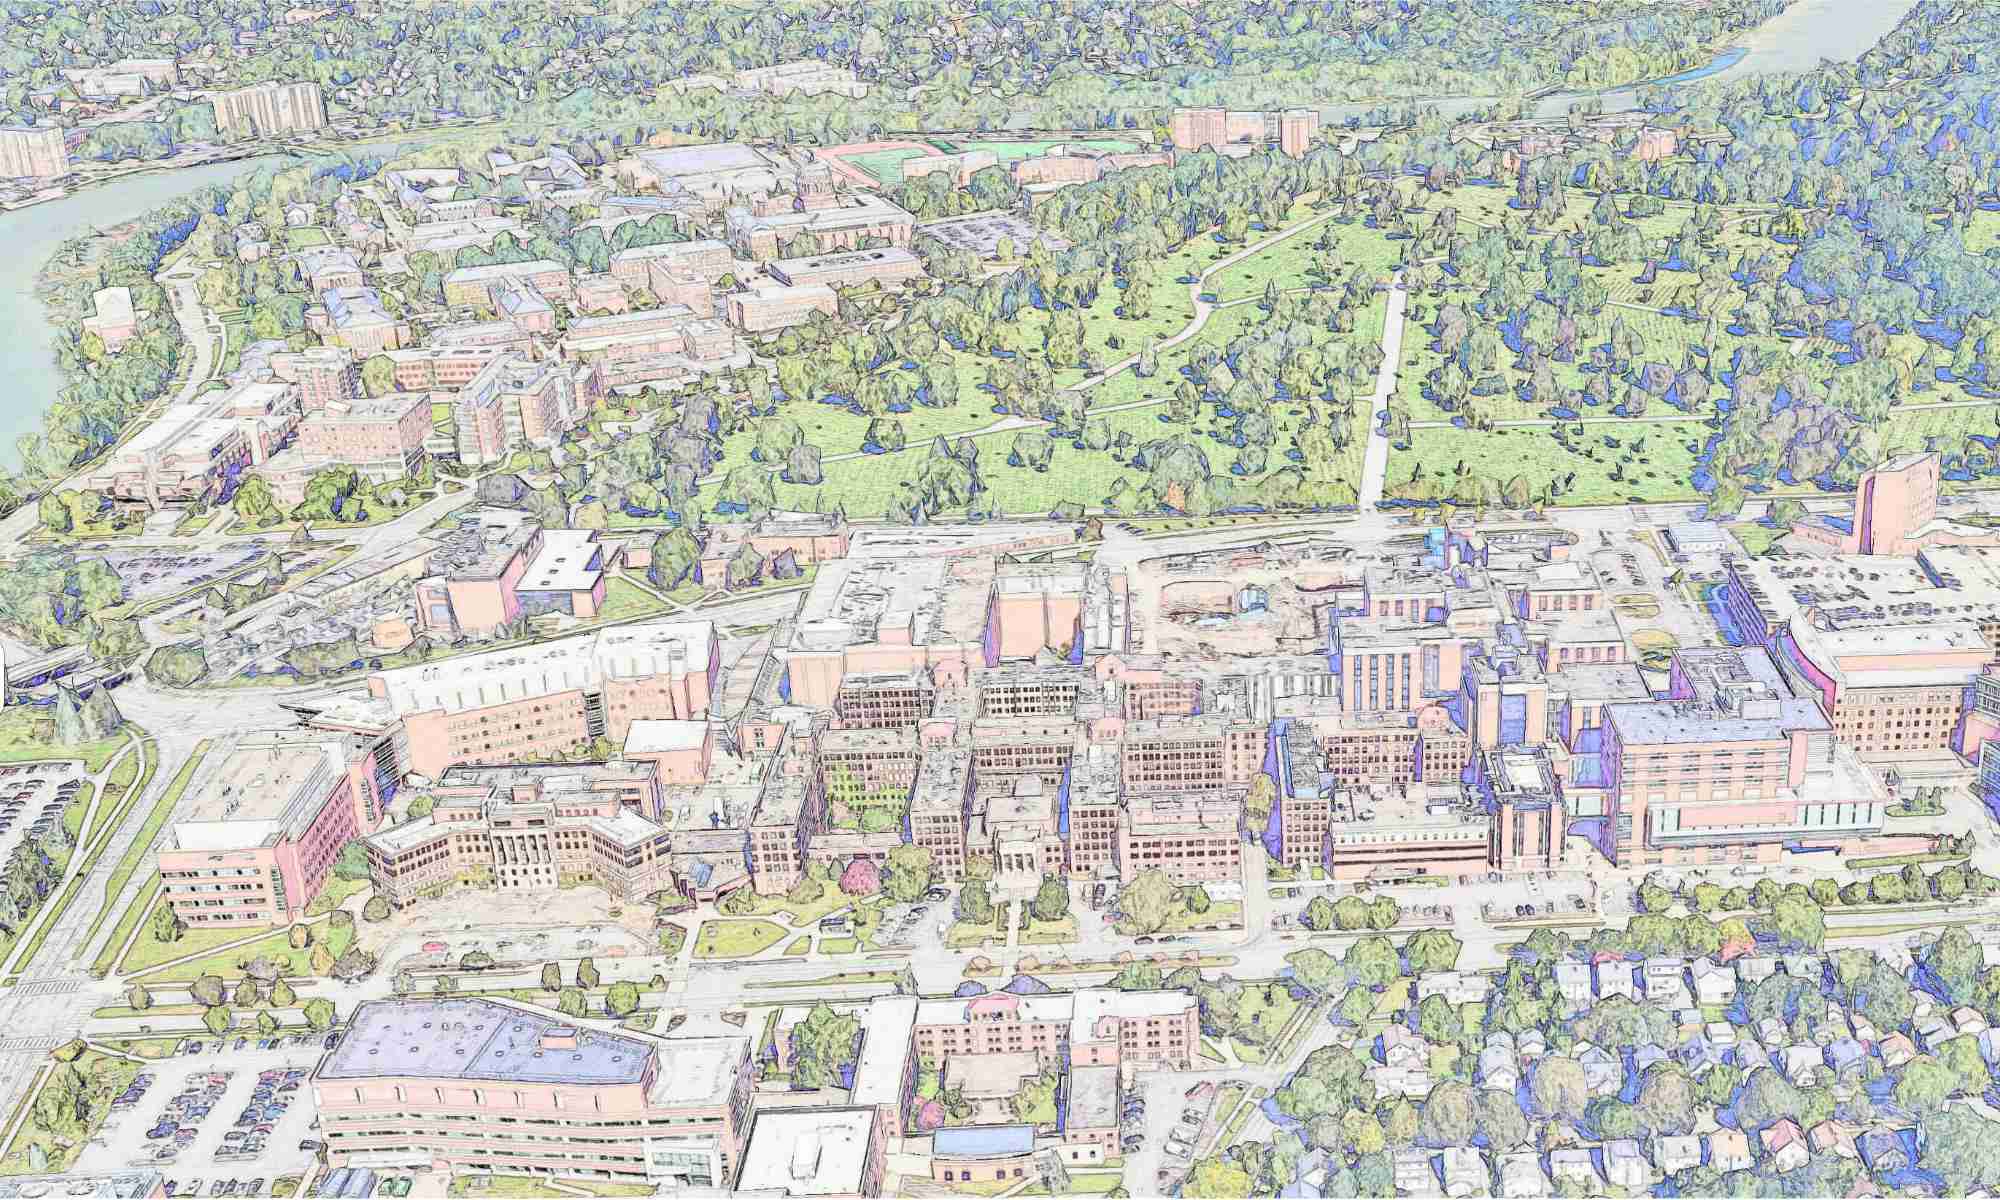 Aerial view of the River Campus and Medical Center Campus that has been posterized to illustrate campus master planning.